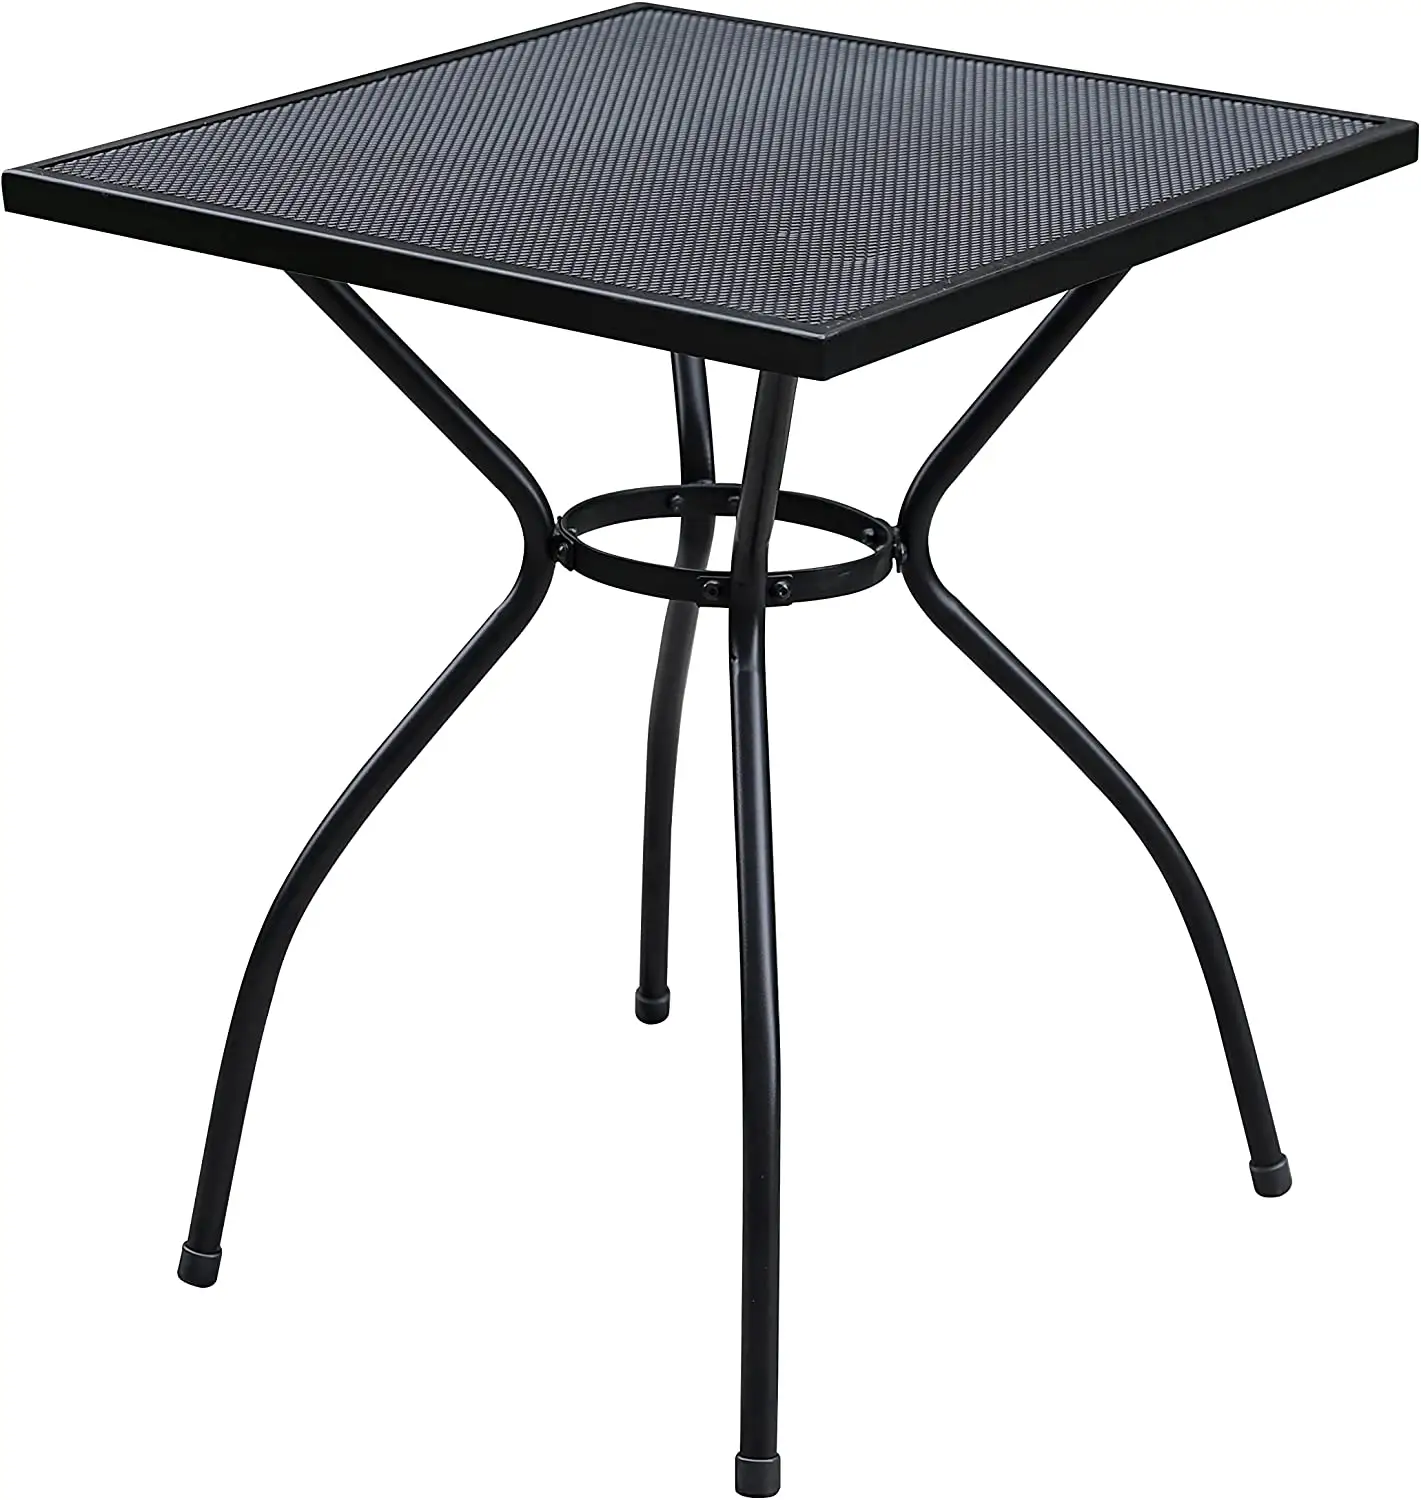 Outdoor Bistro Table Metal Mesh Square Dining Table Coffee Table For Patio Backyard Deck Balcony